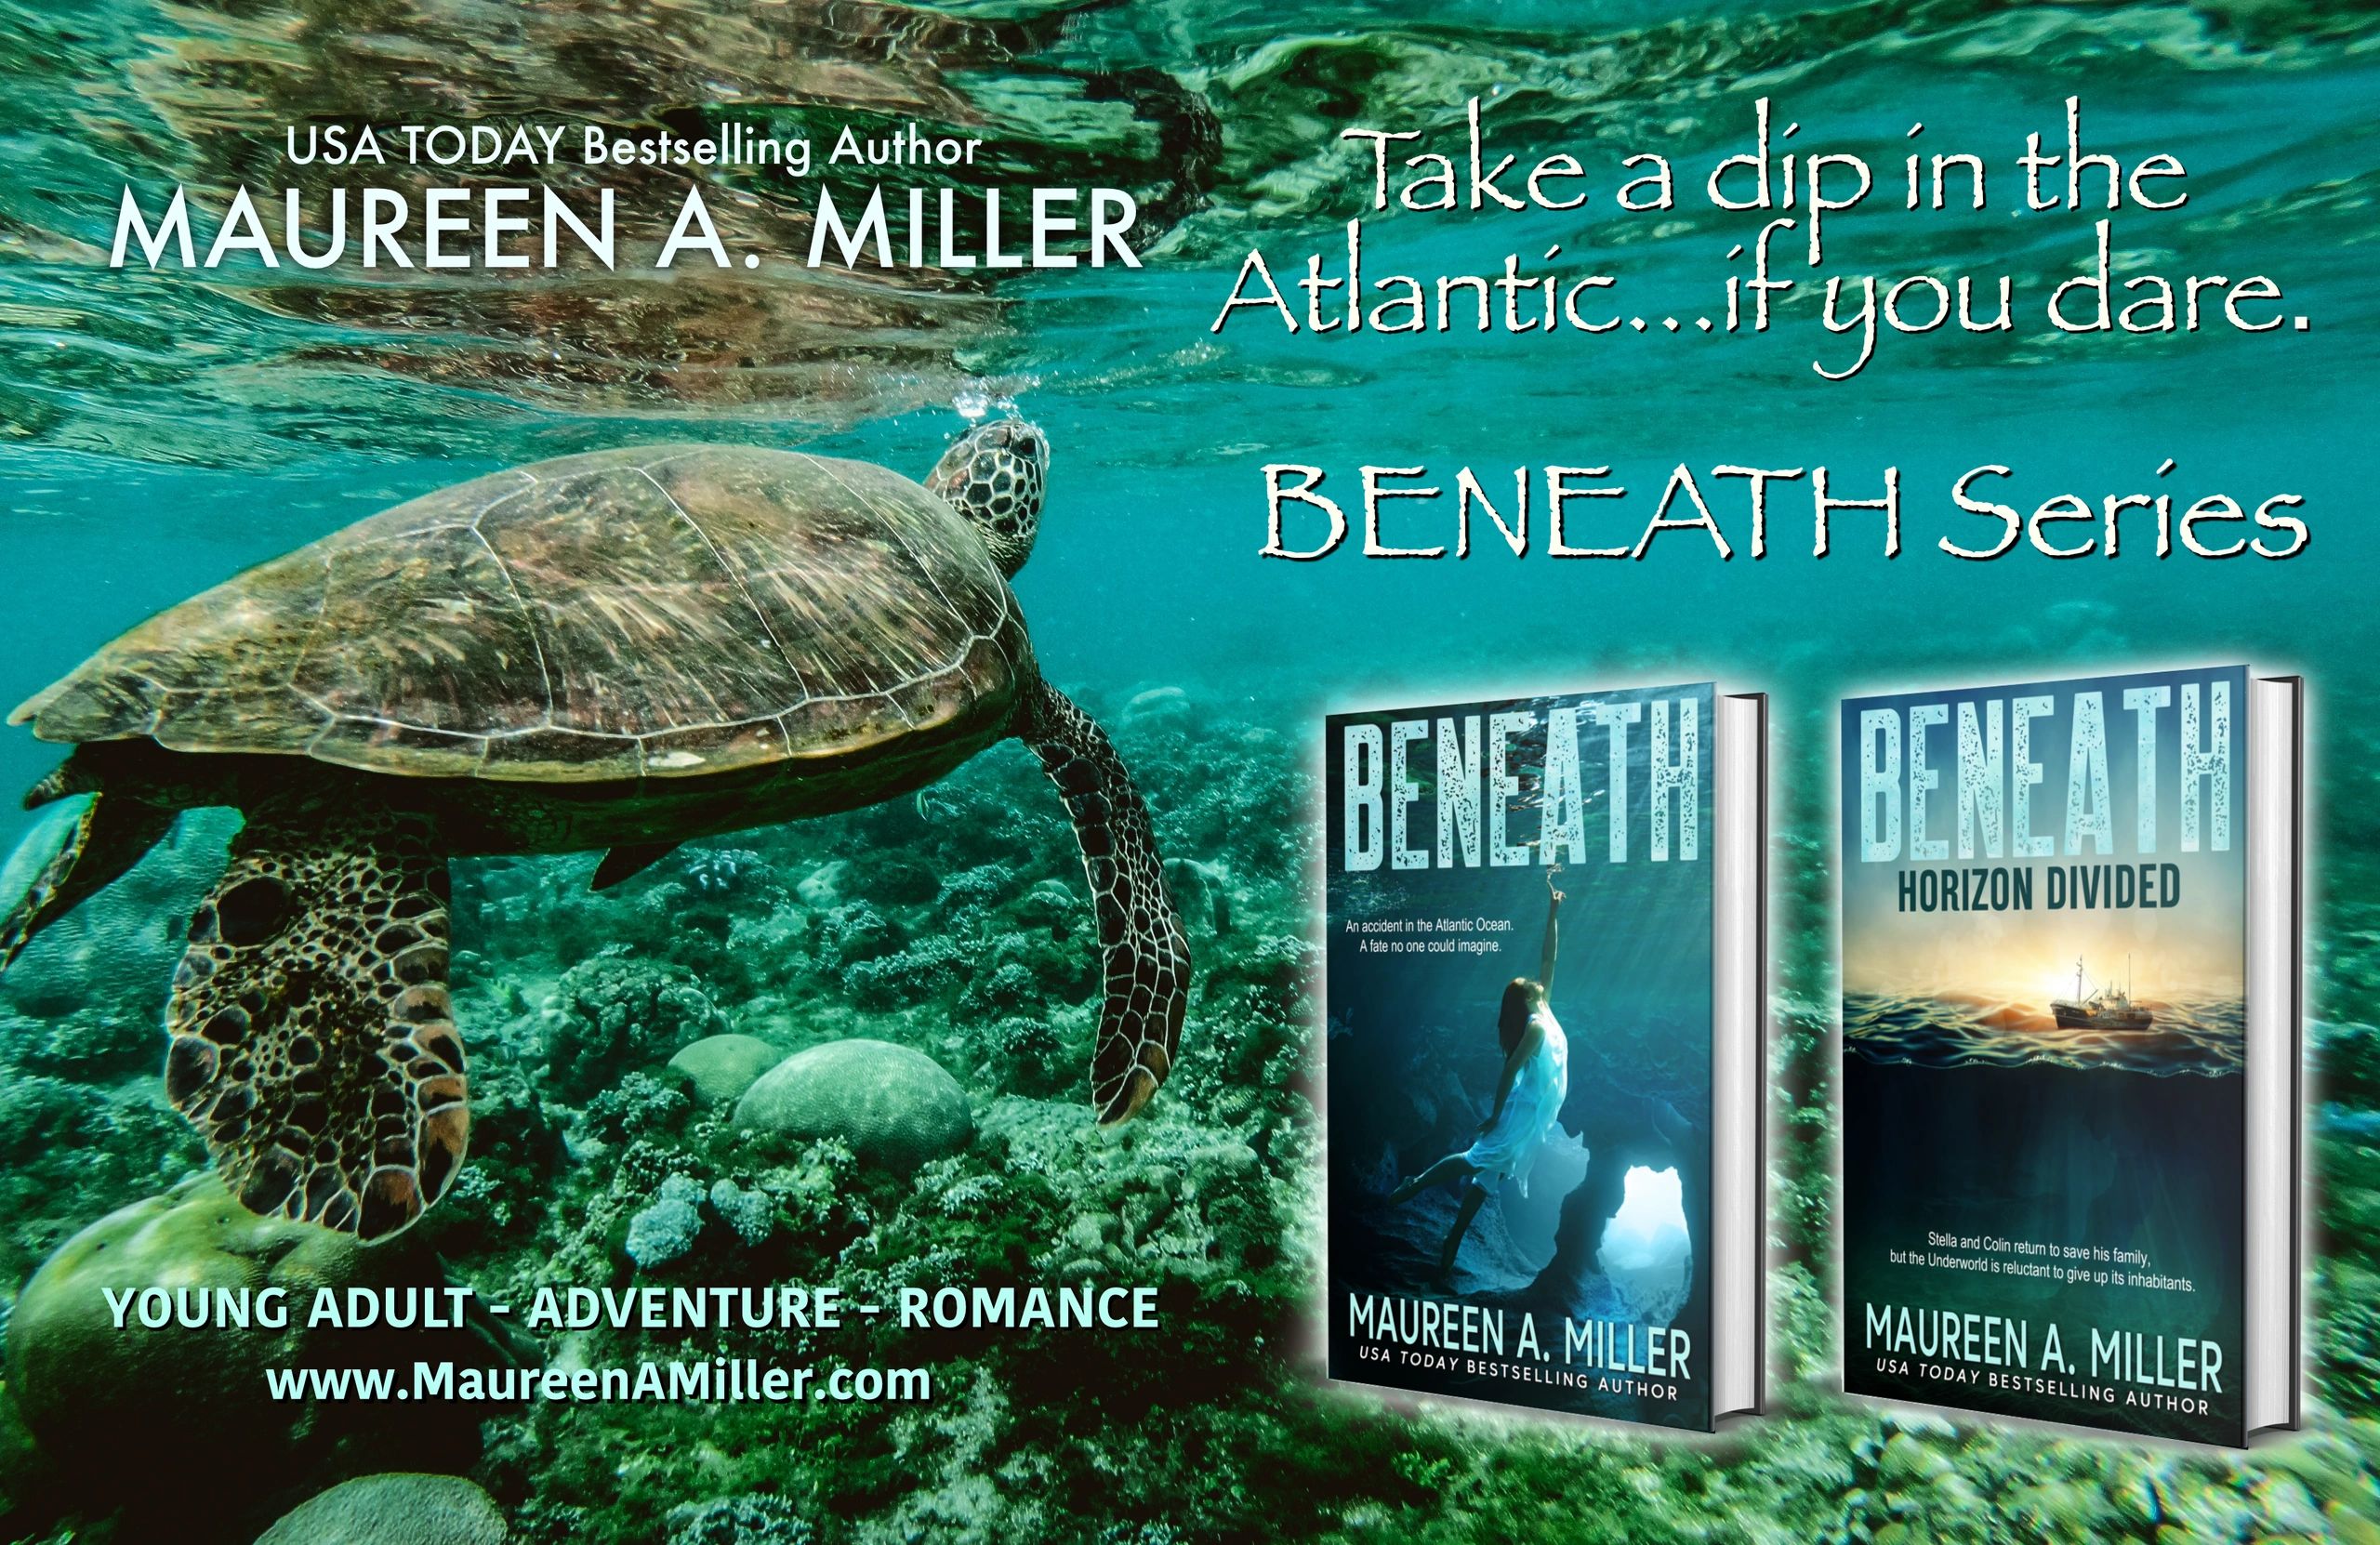 BENEATH series book covers from Maureen A. Miller. Sea turtle in the ocean. 